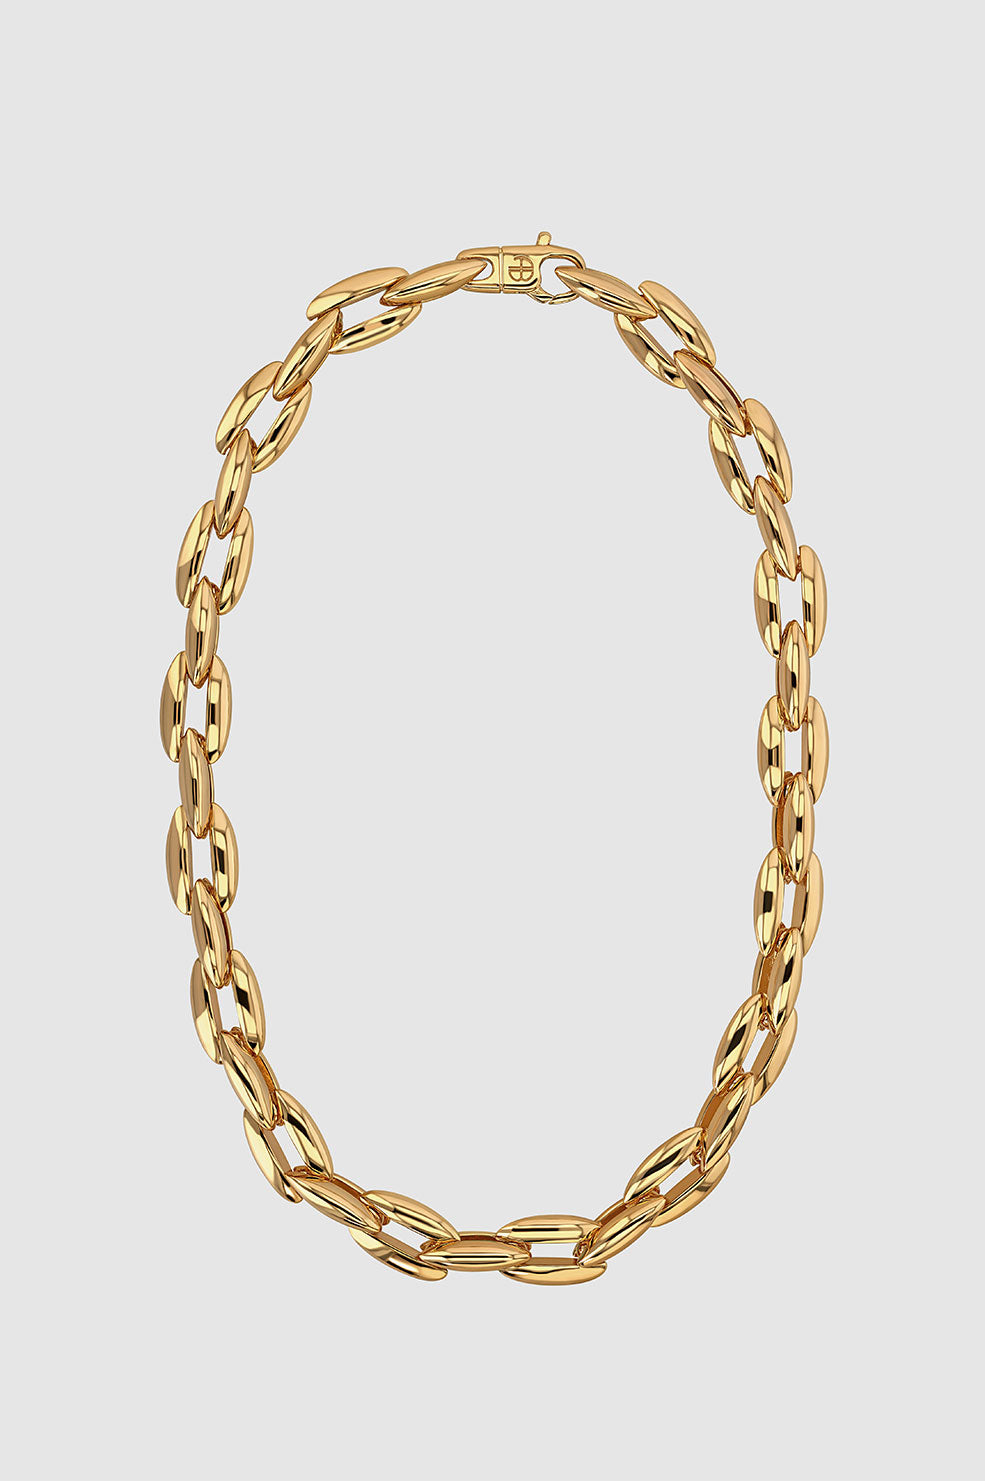 gold chain link